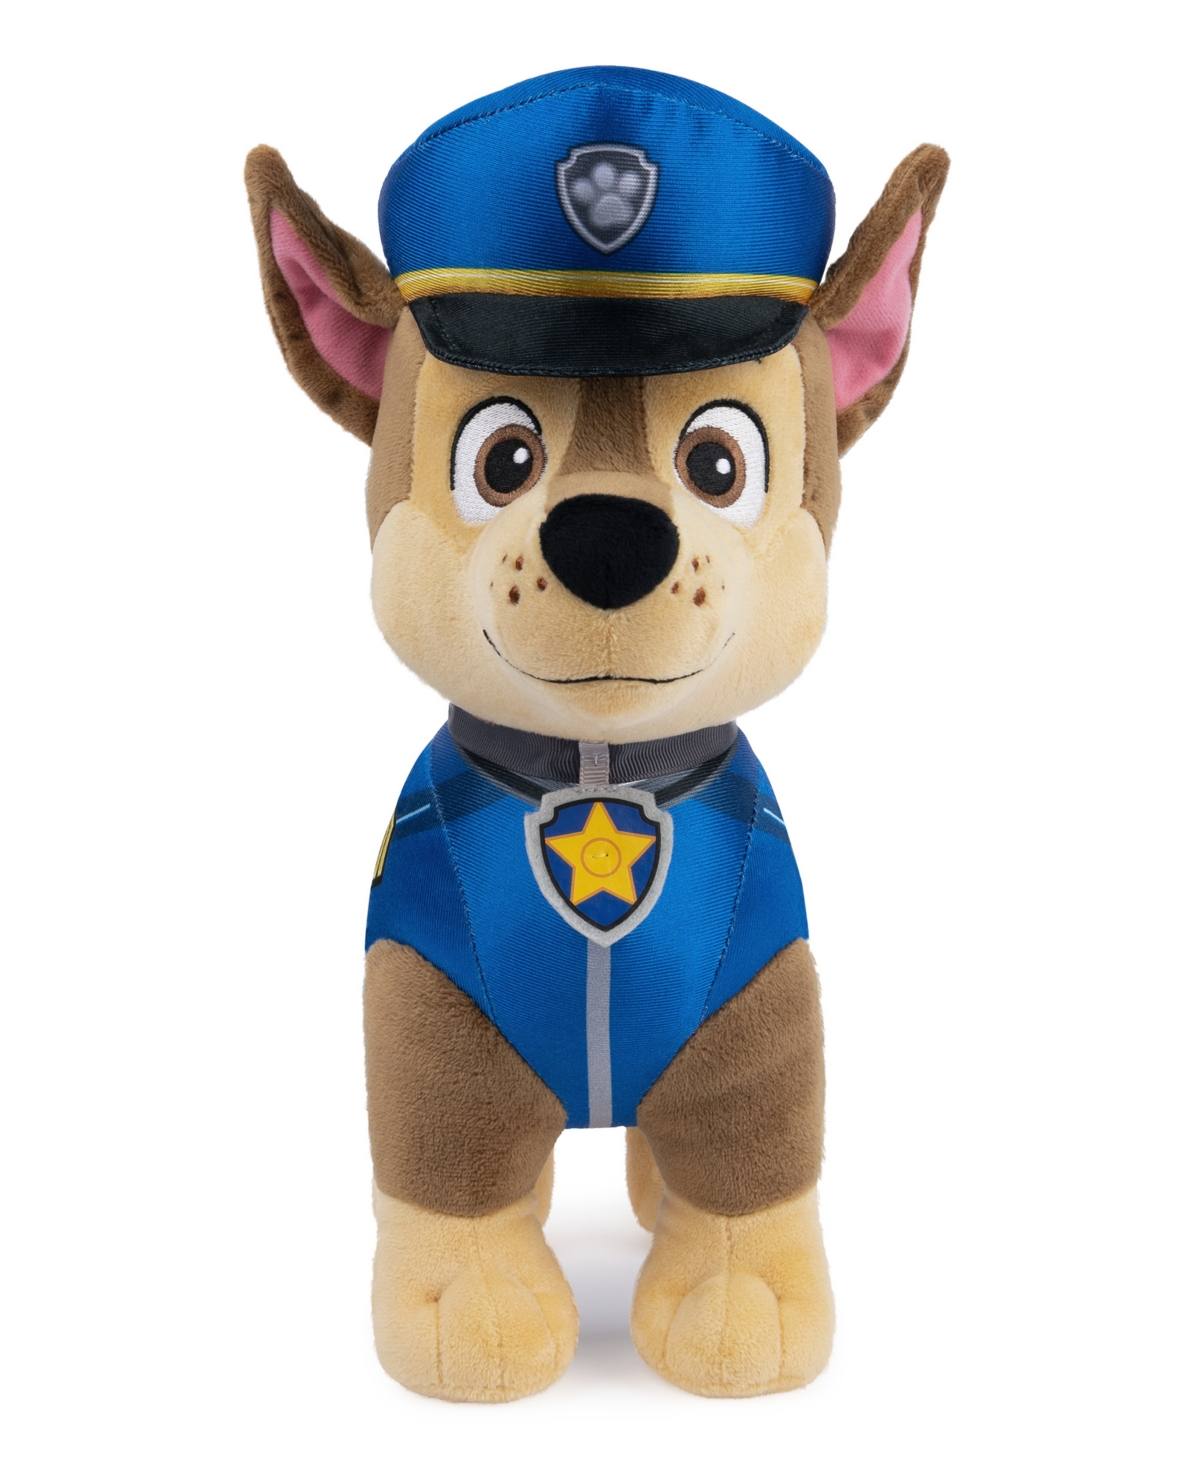 Paw Patrol Kids' Chase In Heroic Standing Position Premium Stuffed Animal Plush Toy In Multi-color